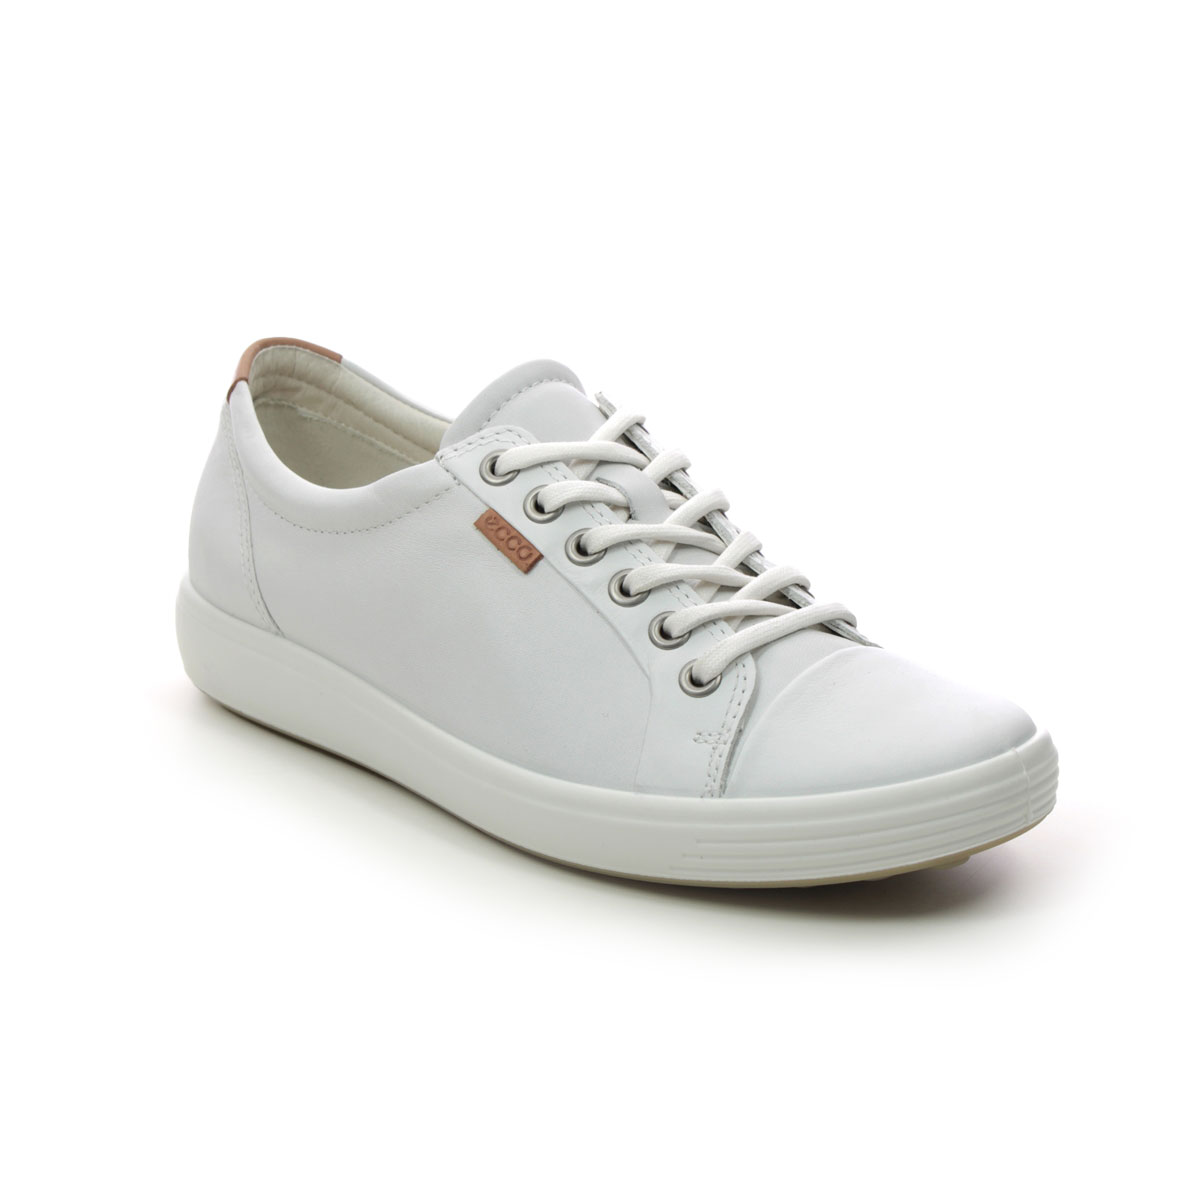 Ecco Soft 7 Lace White Leather Womens Trainers 430003-01007 In Size 42 In Plain White Leather